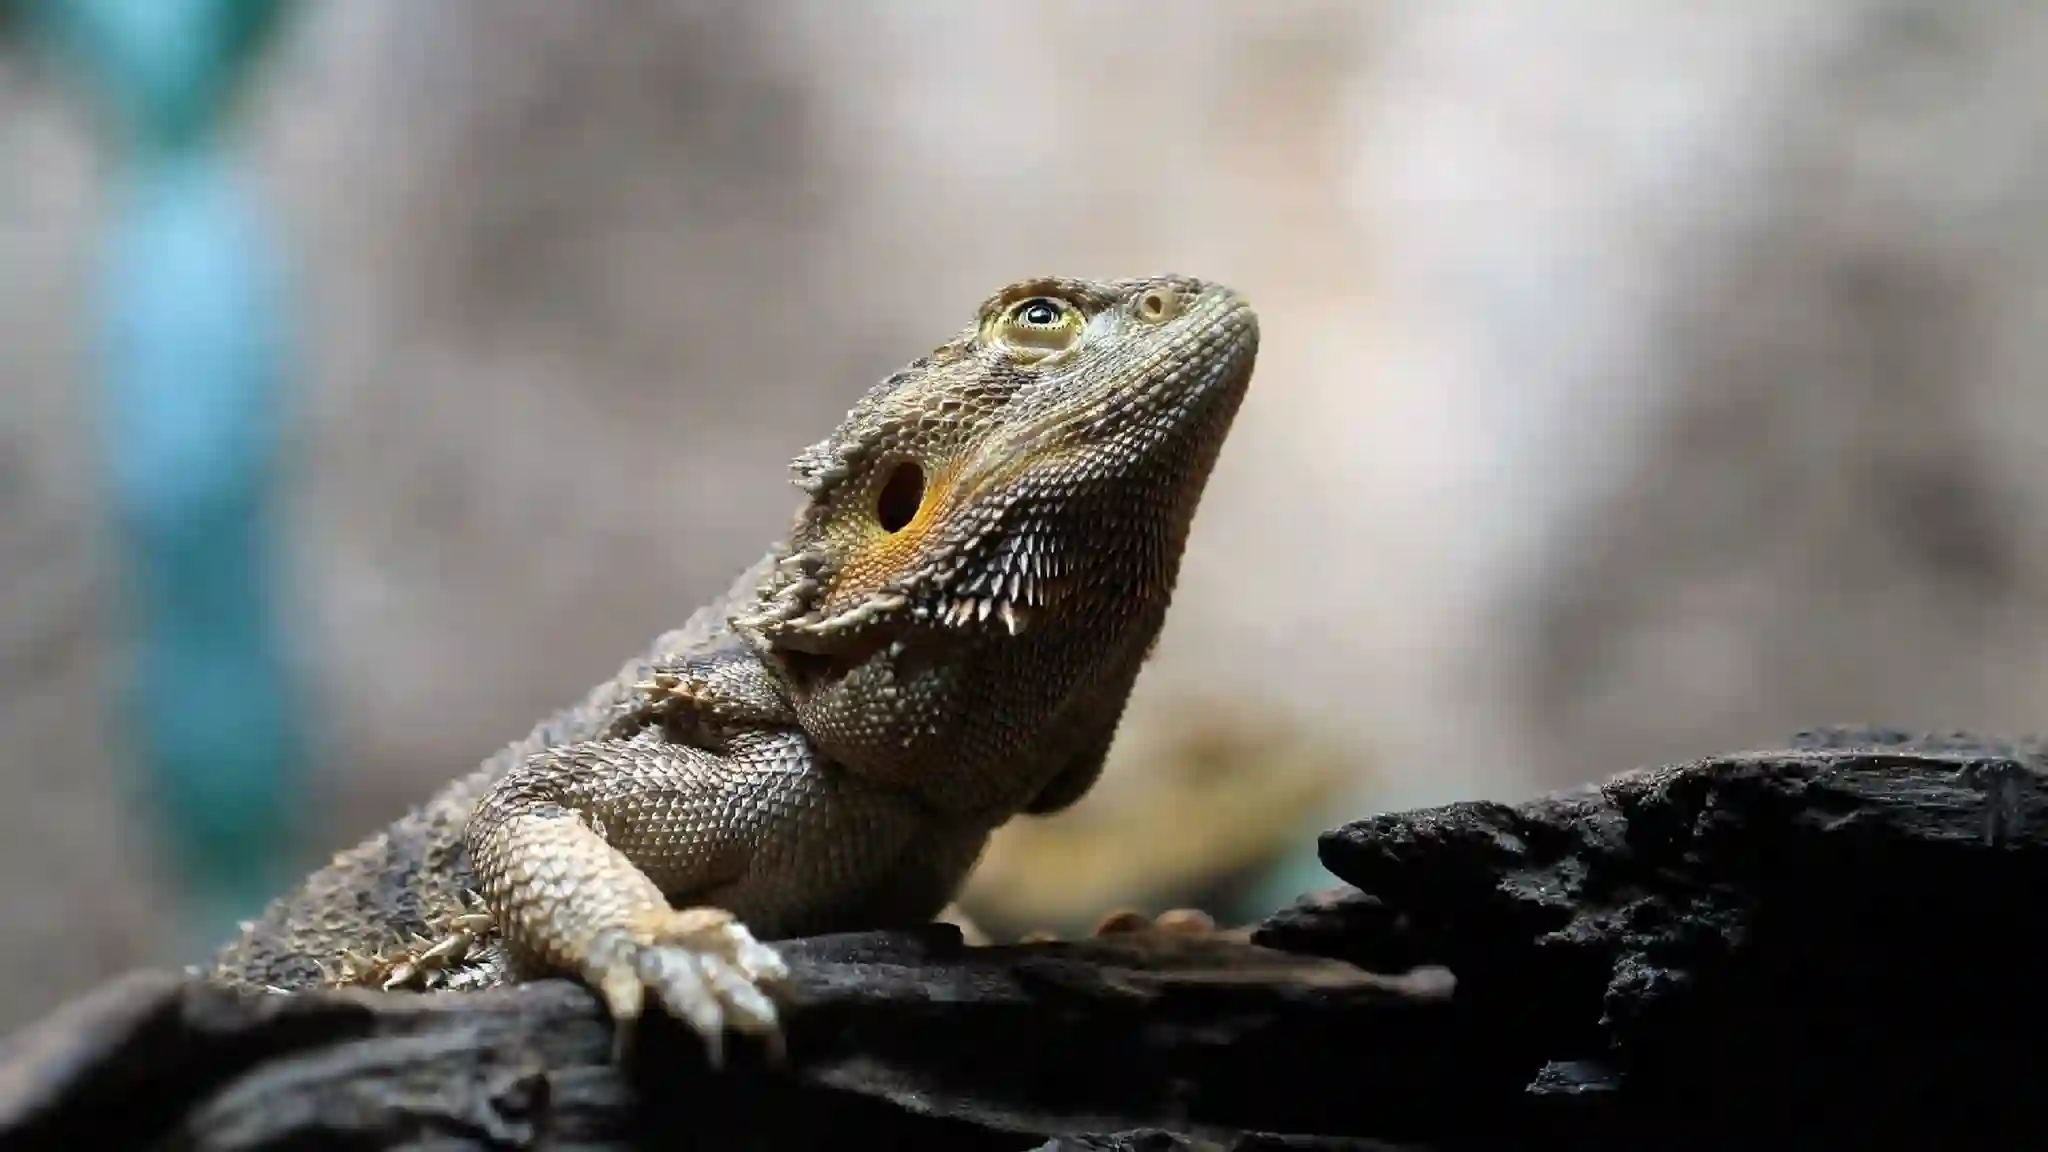 Can Bearded Dragons Eat Bay Leaves?